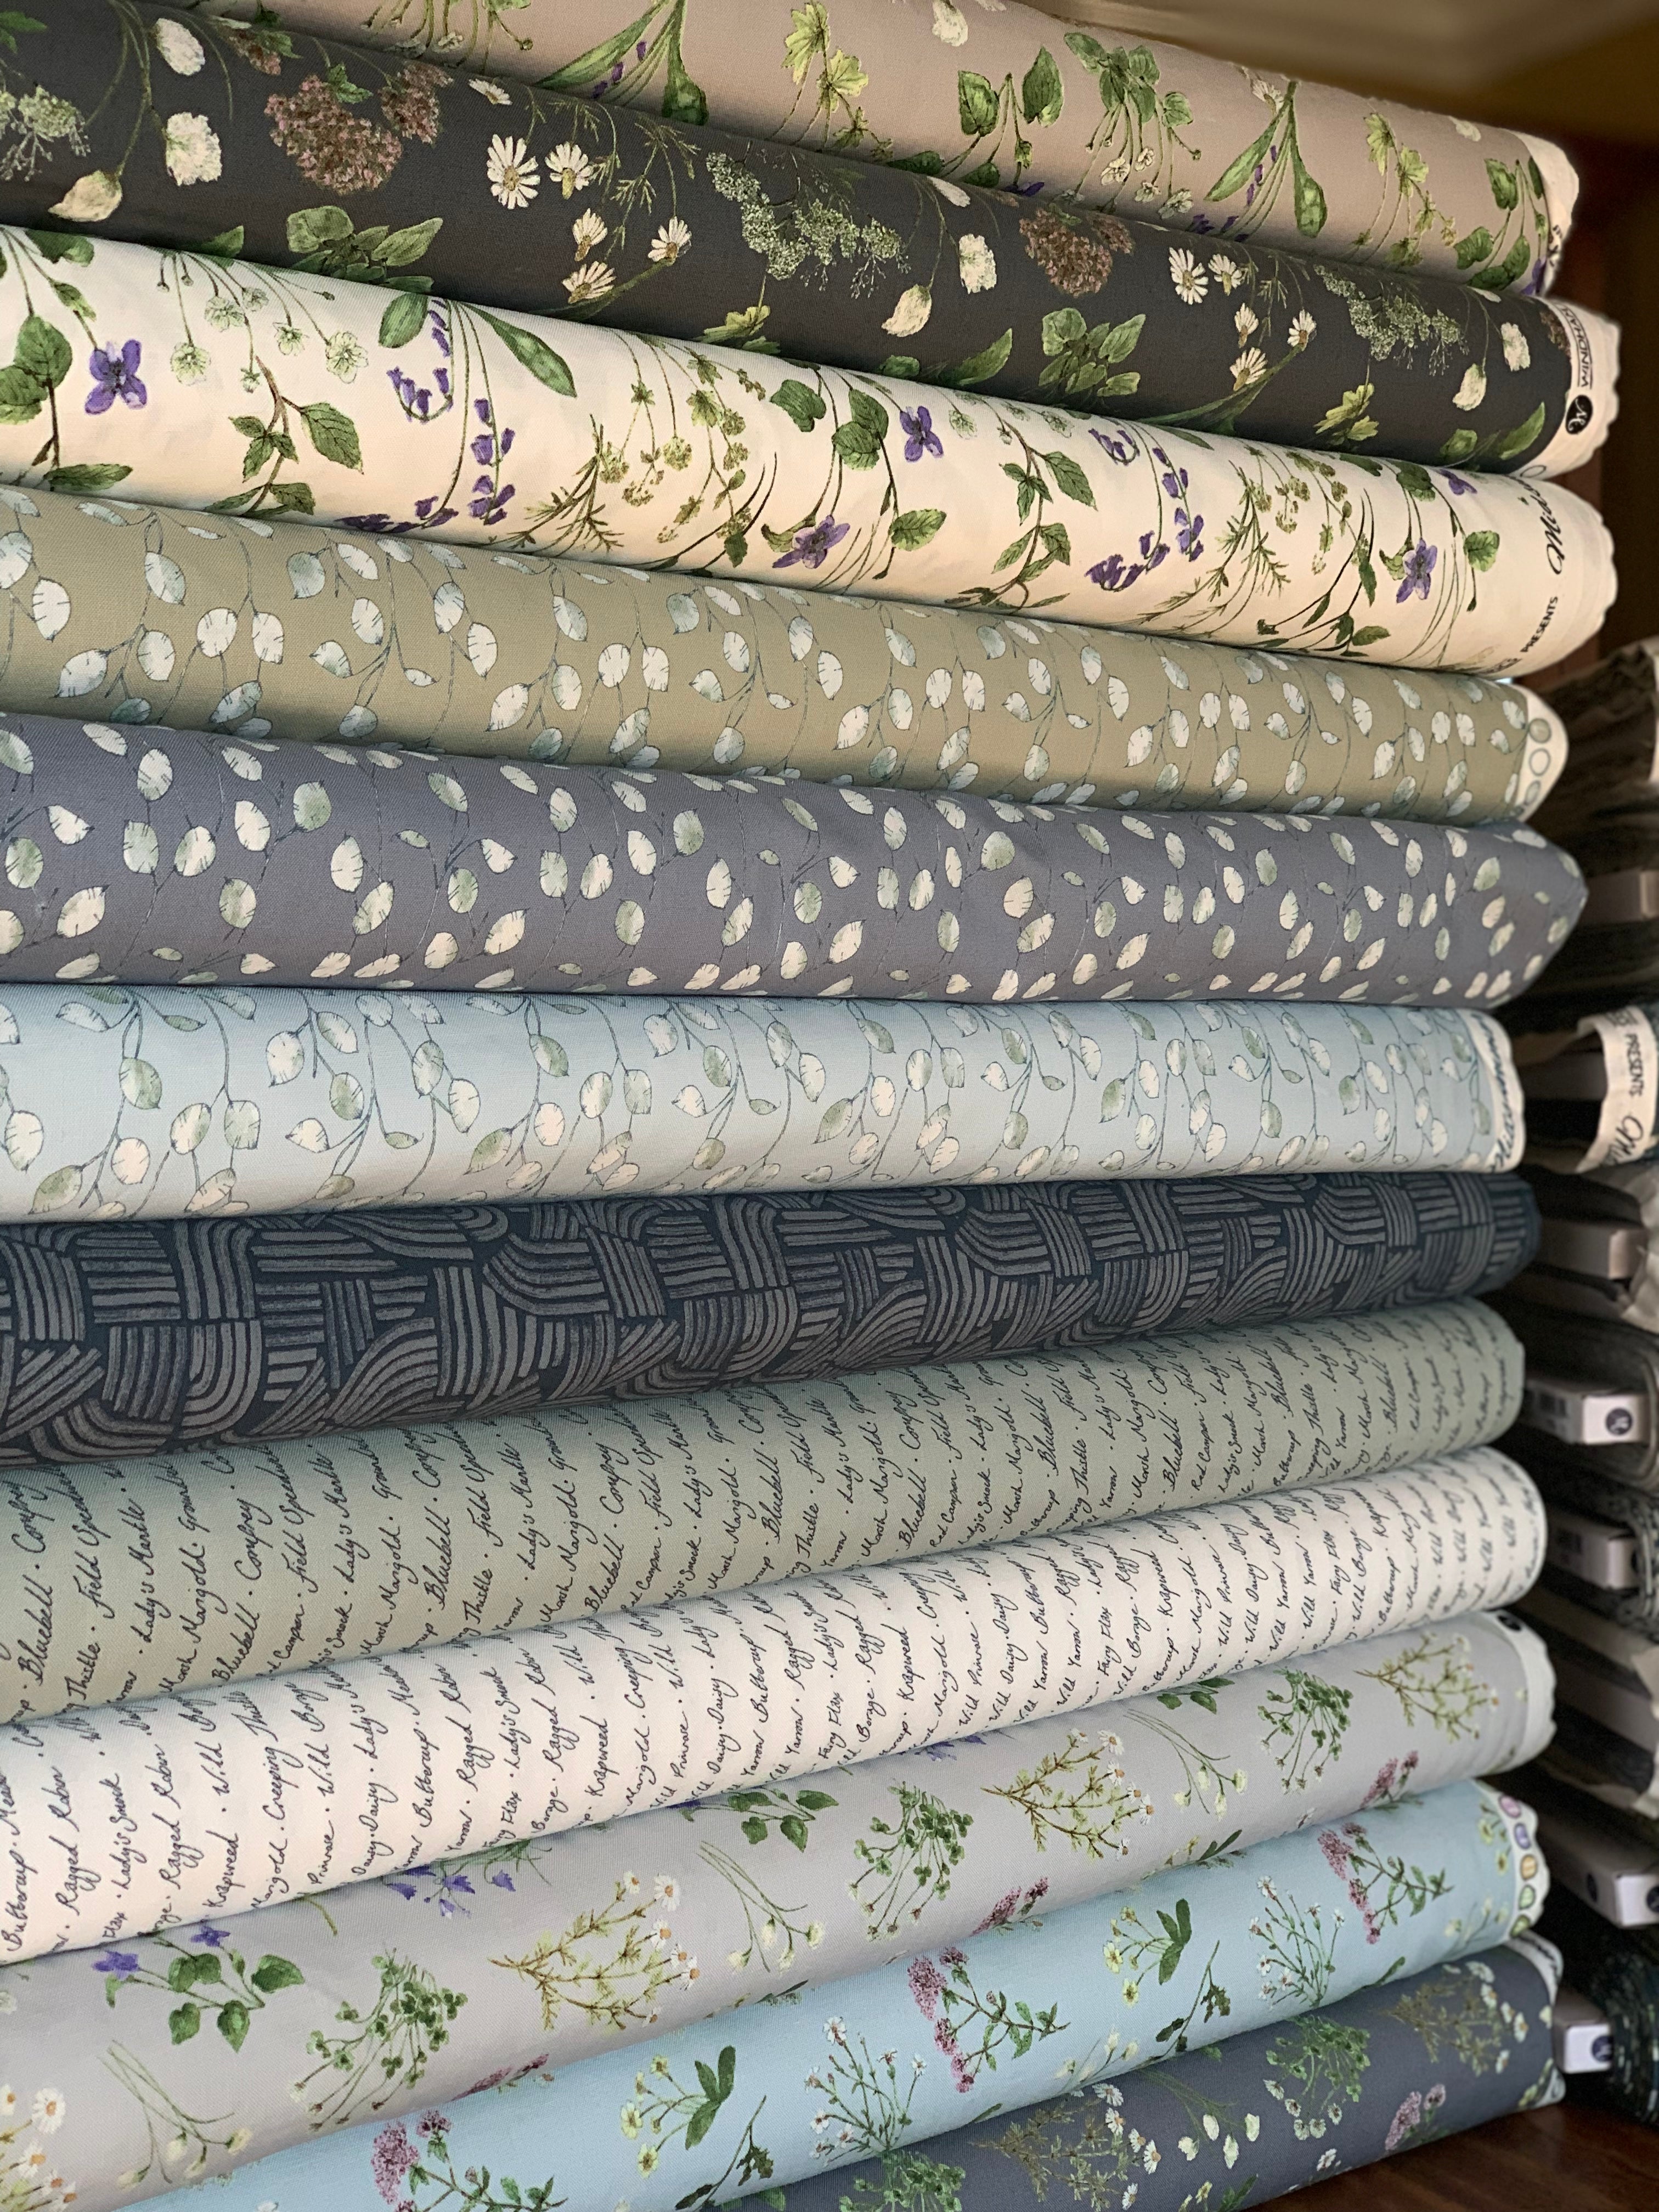 Midsummer Collection by Hackney and Co from Windham Fabrics - Floral, Rabbit, Bunny, Meadow Theme